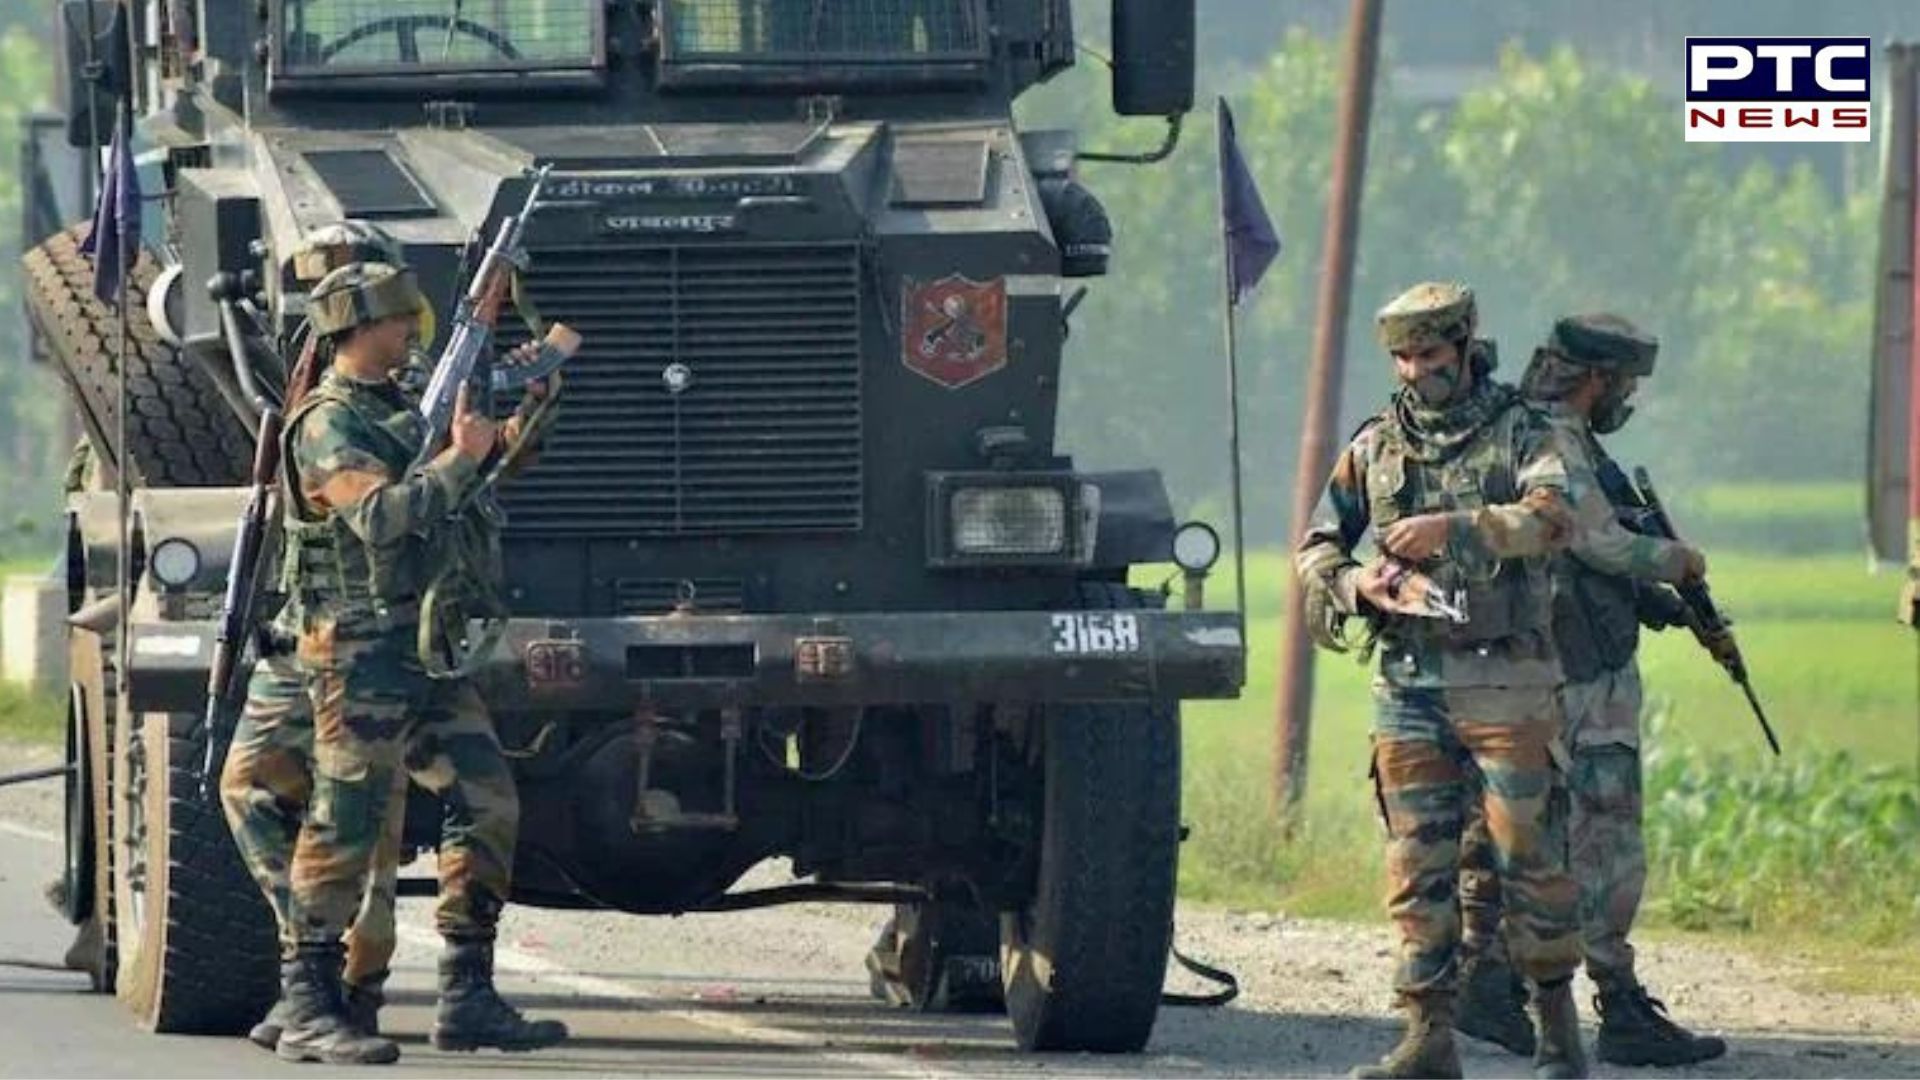 Rajouri terror attack: Another soldier succumbs to injuries; death toll reaches 4